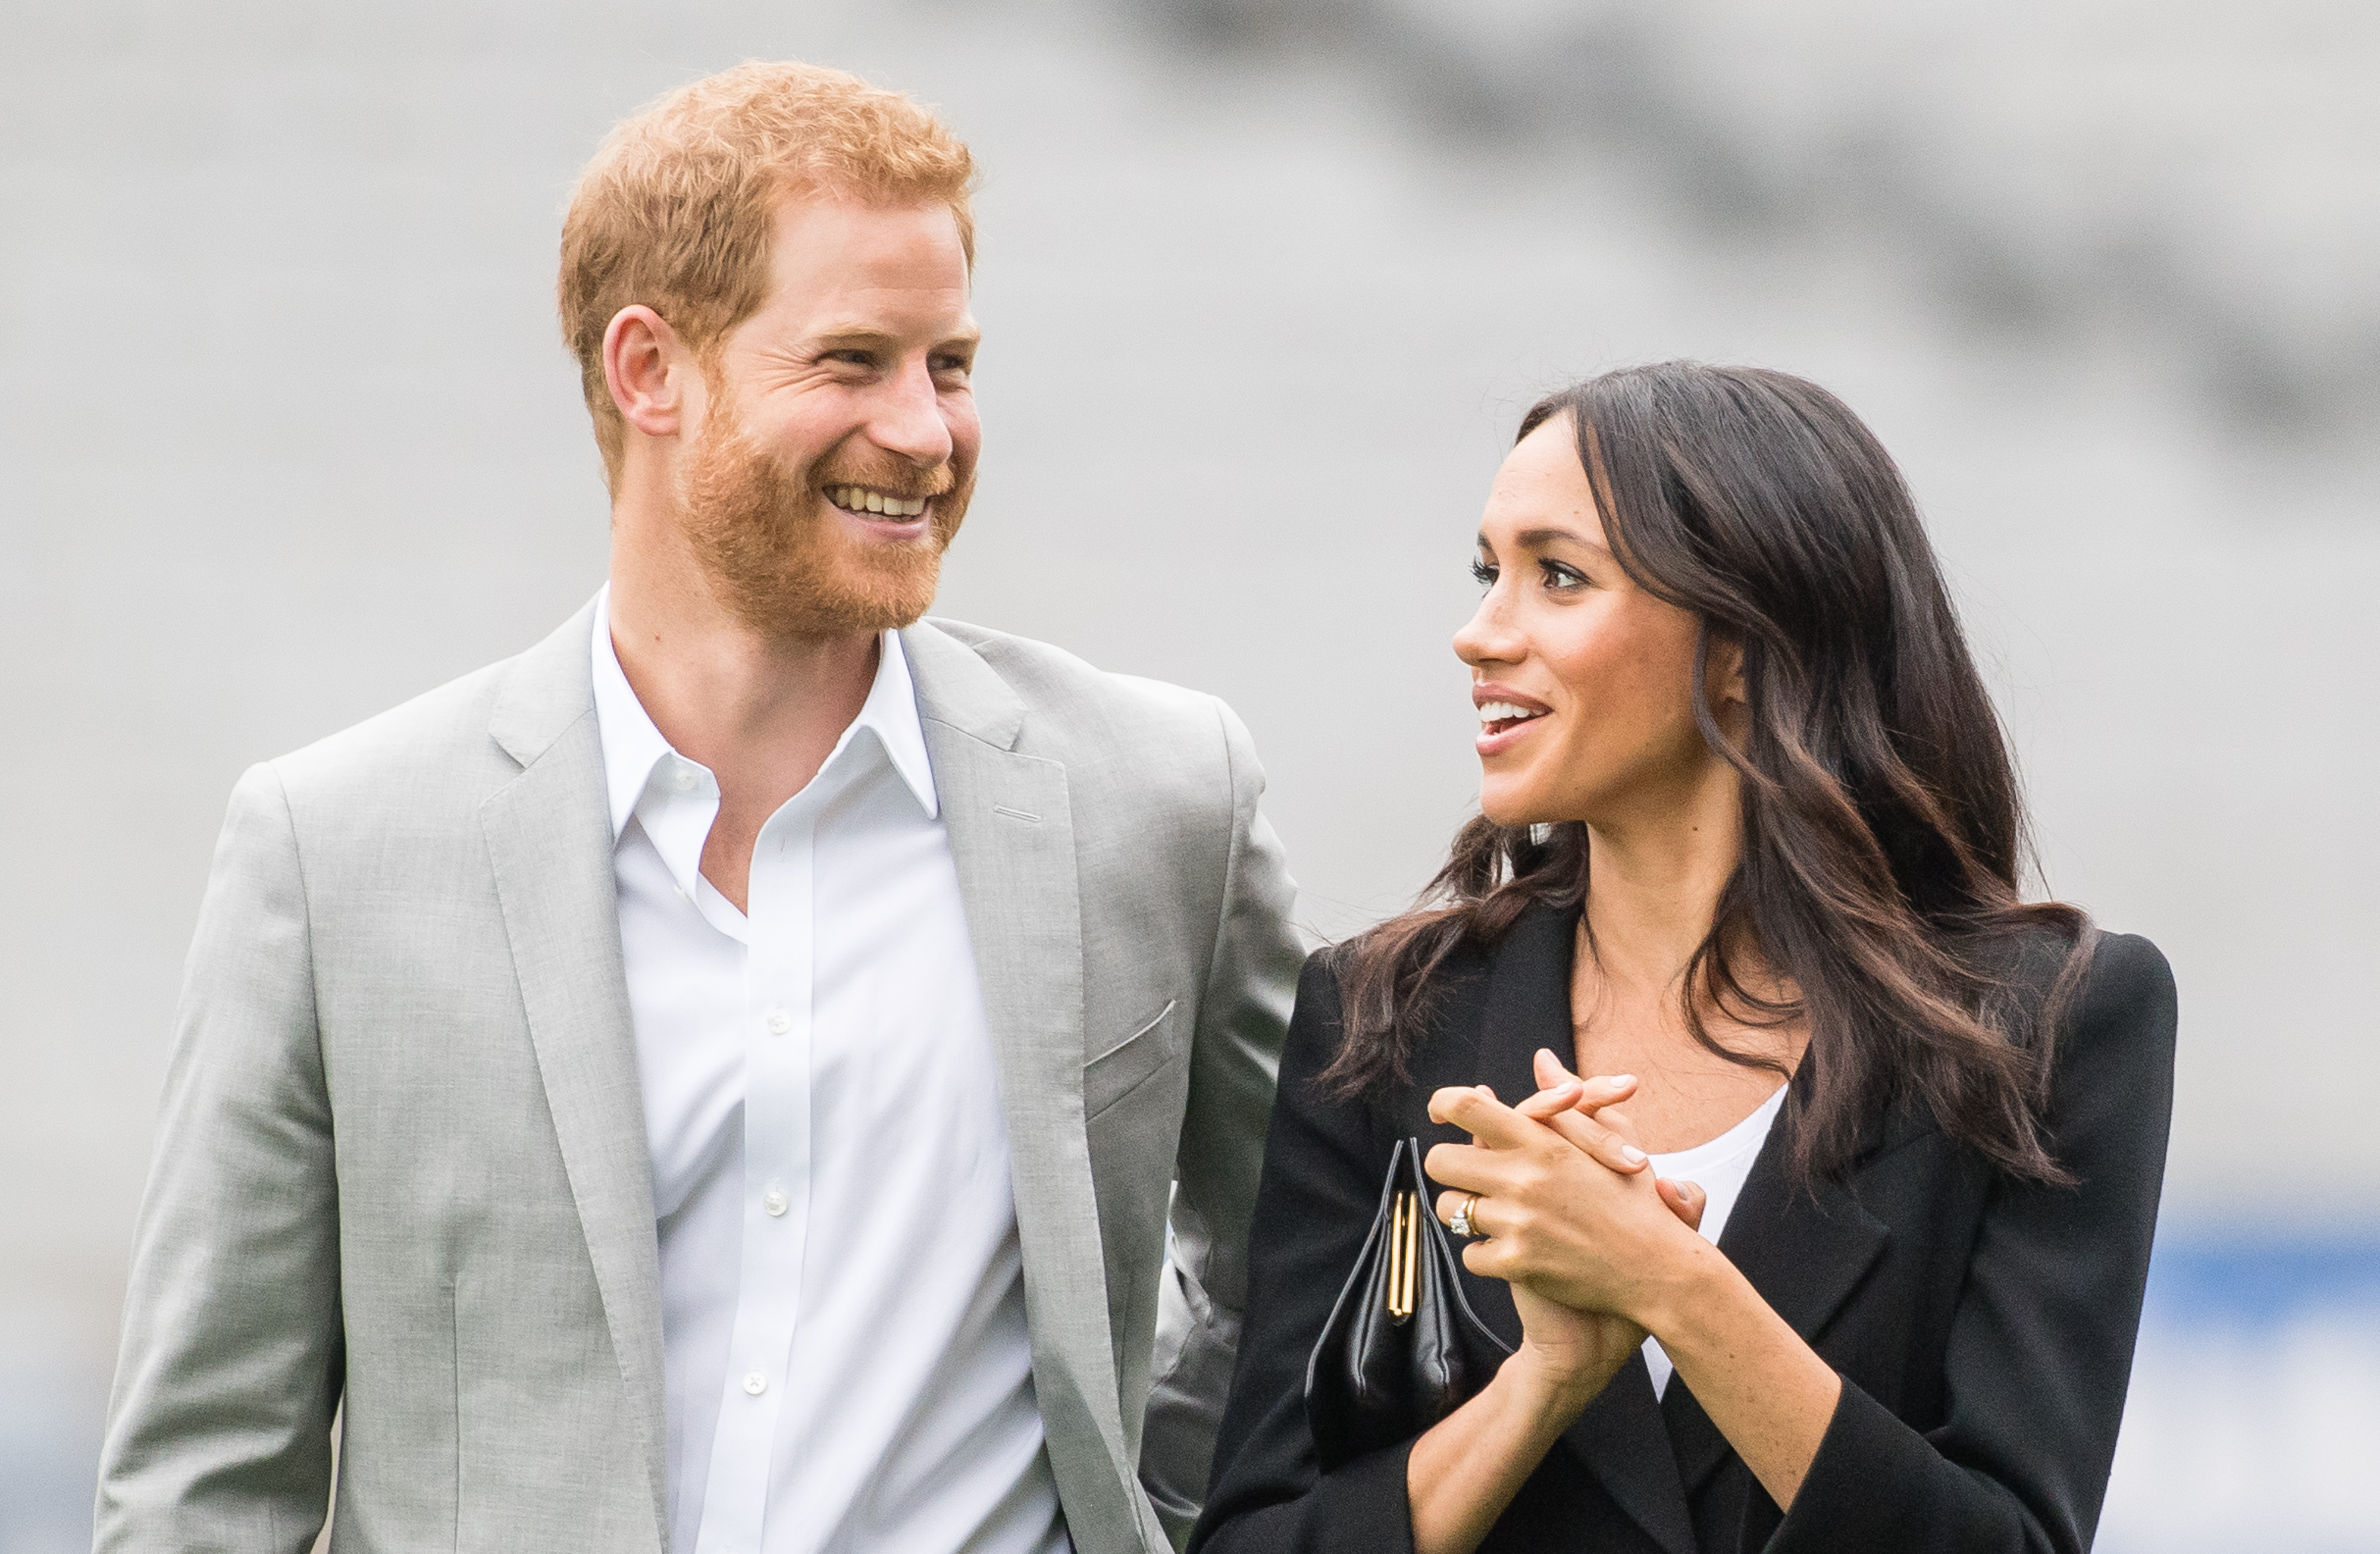 Meghan Markle and Prince Harry, who is not wearing a tie, visit Croke Park, home of Ireland's largest sporting organization